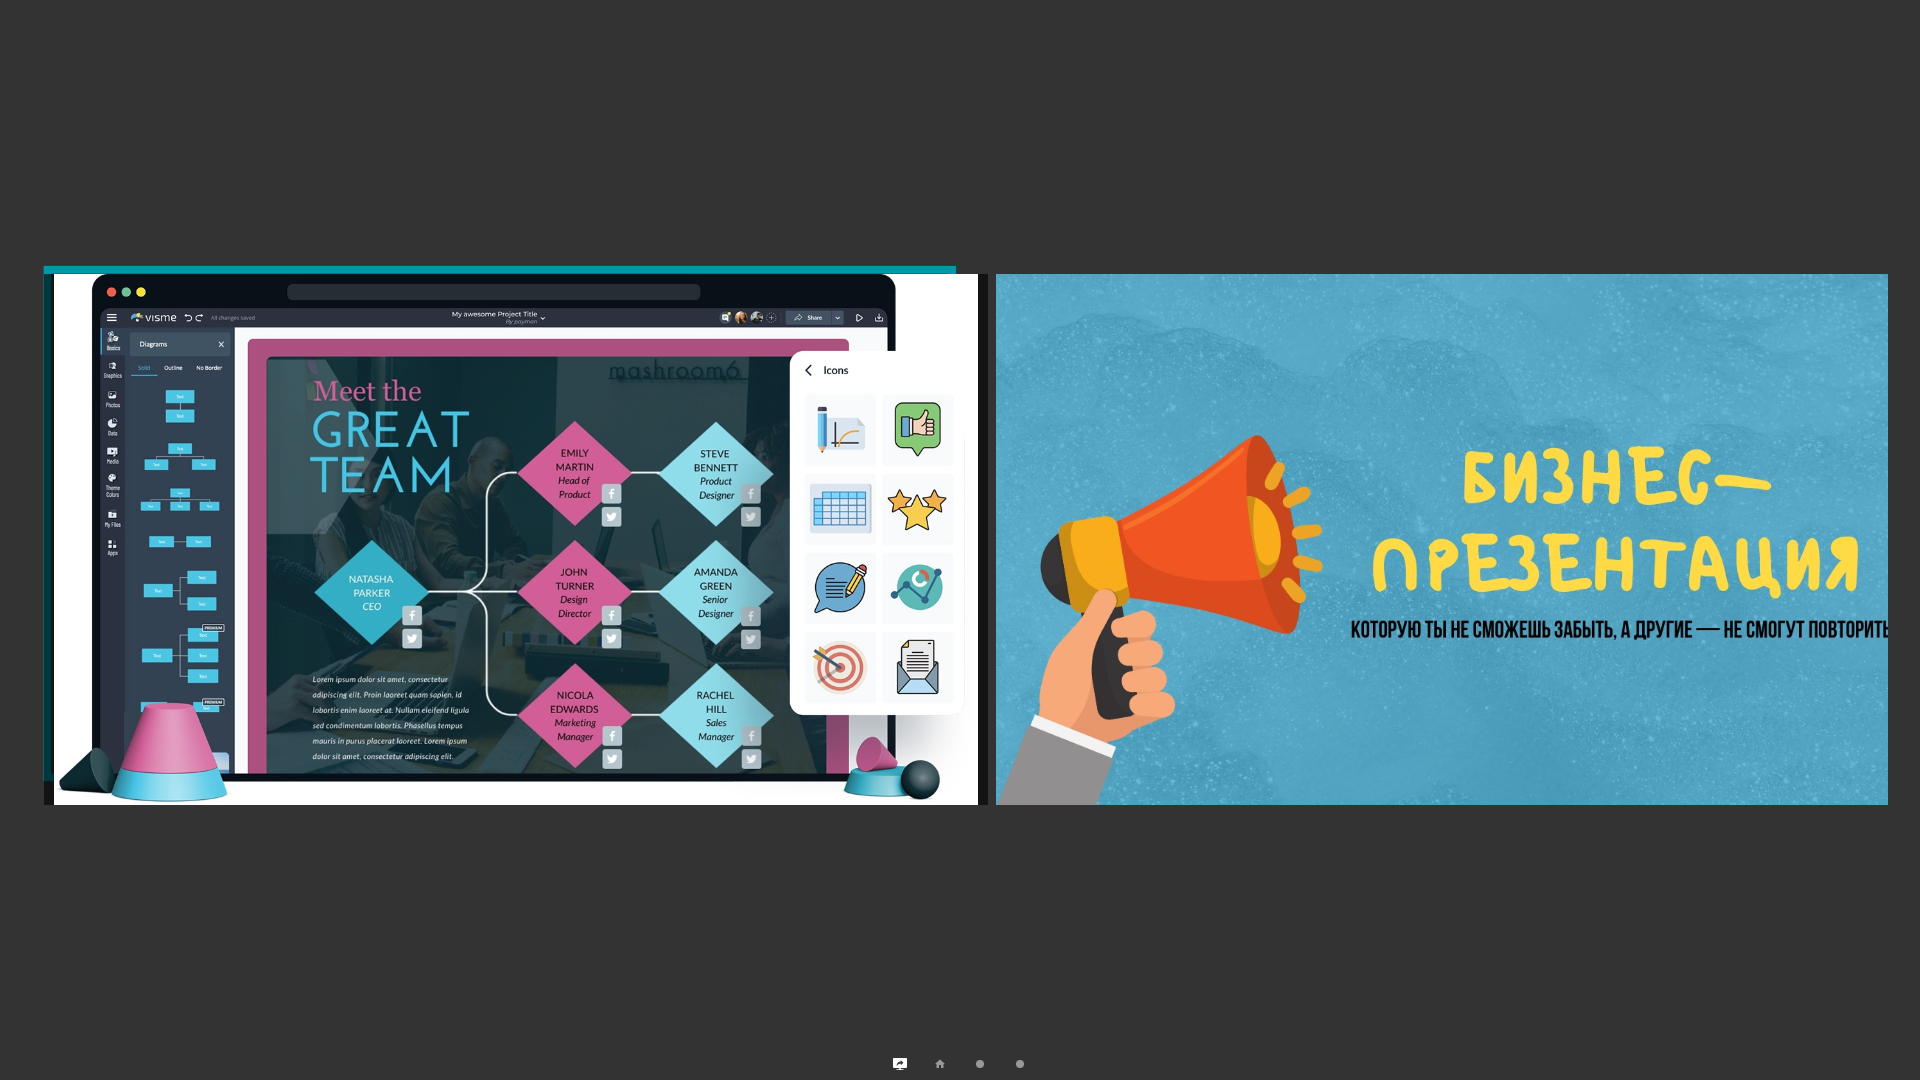 /client-android-tv/media/about_layouts_two_presentations/ru.png